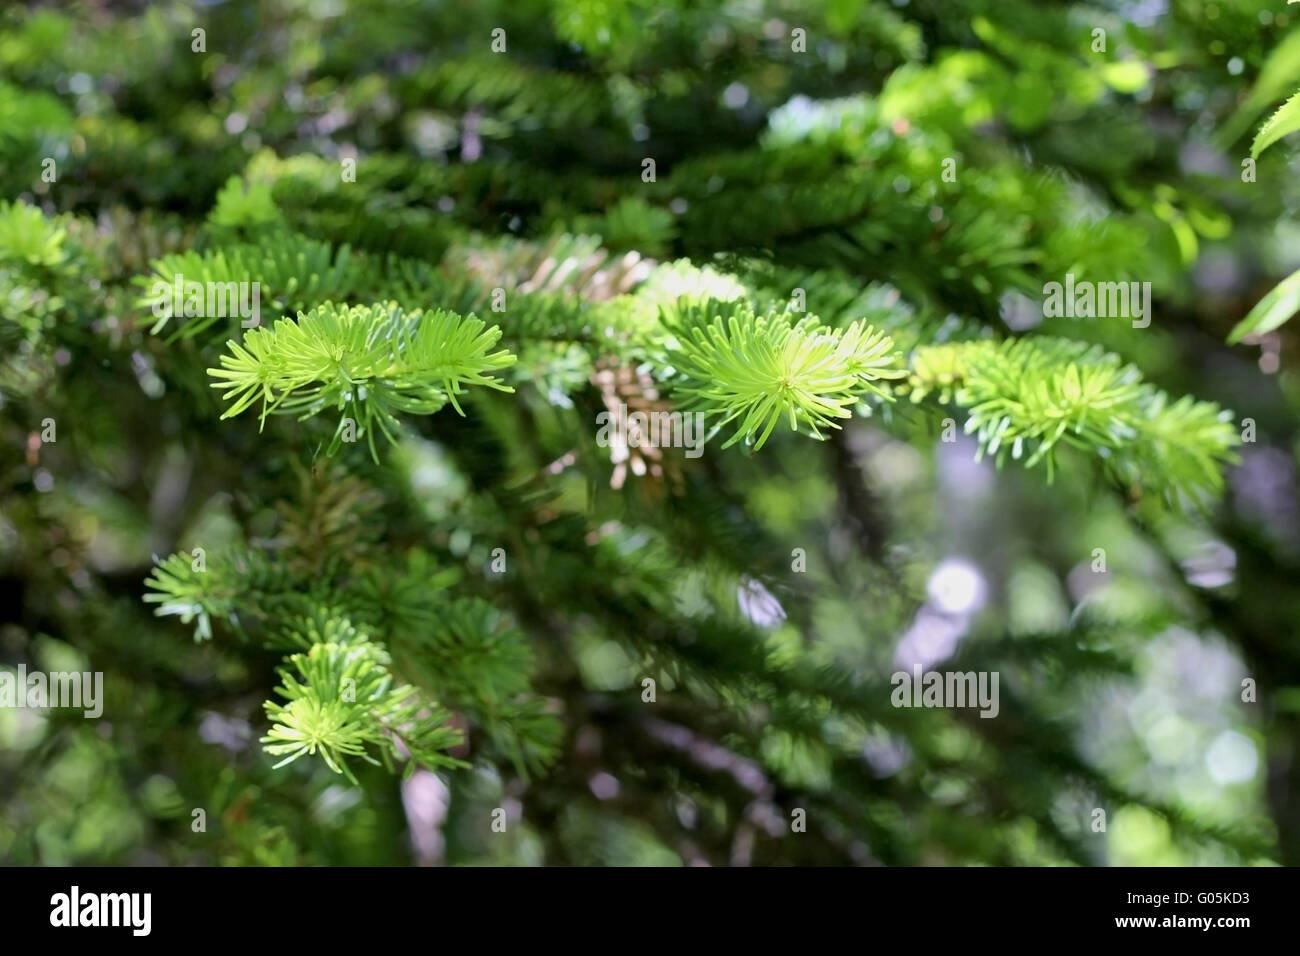 New green pins of the fir branch Stock Photo - Alamy